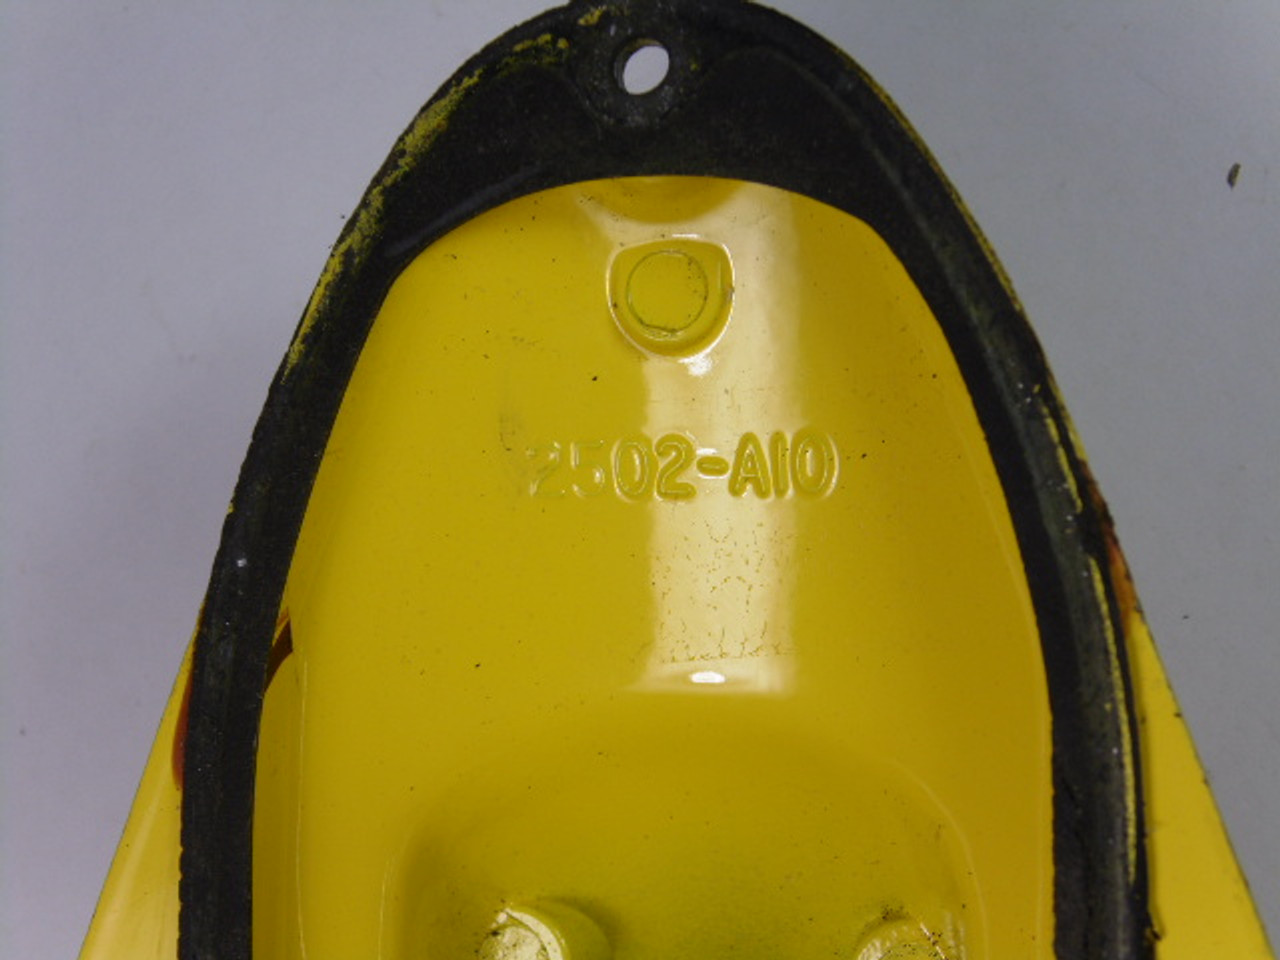 Generic 2502-A10 Pedal Cover USED